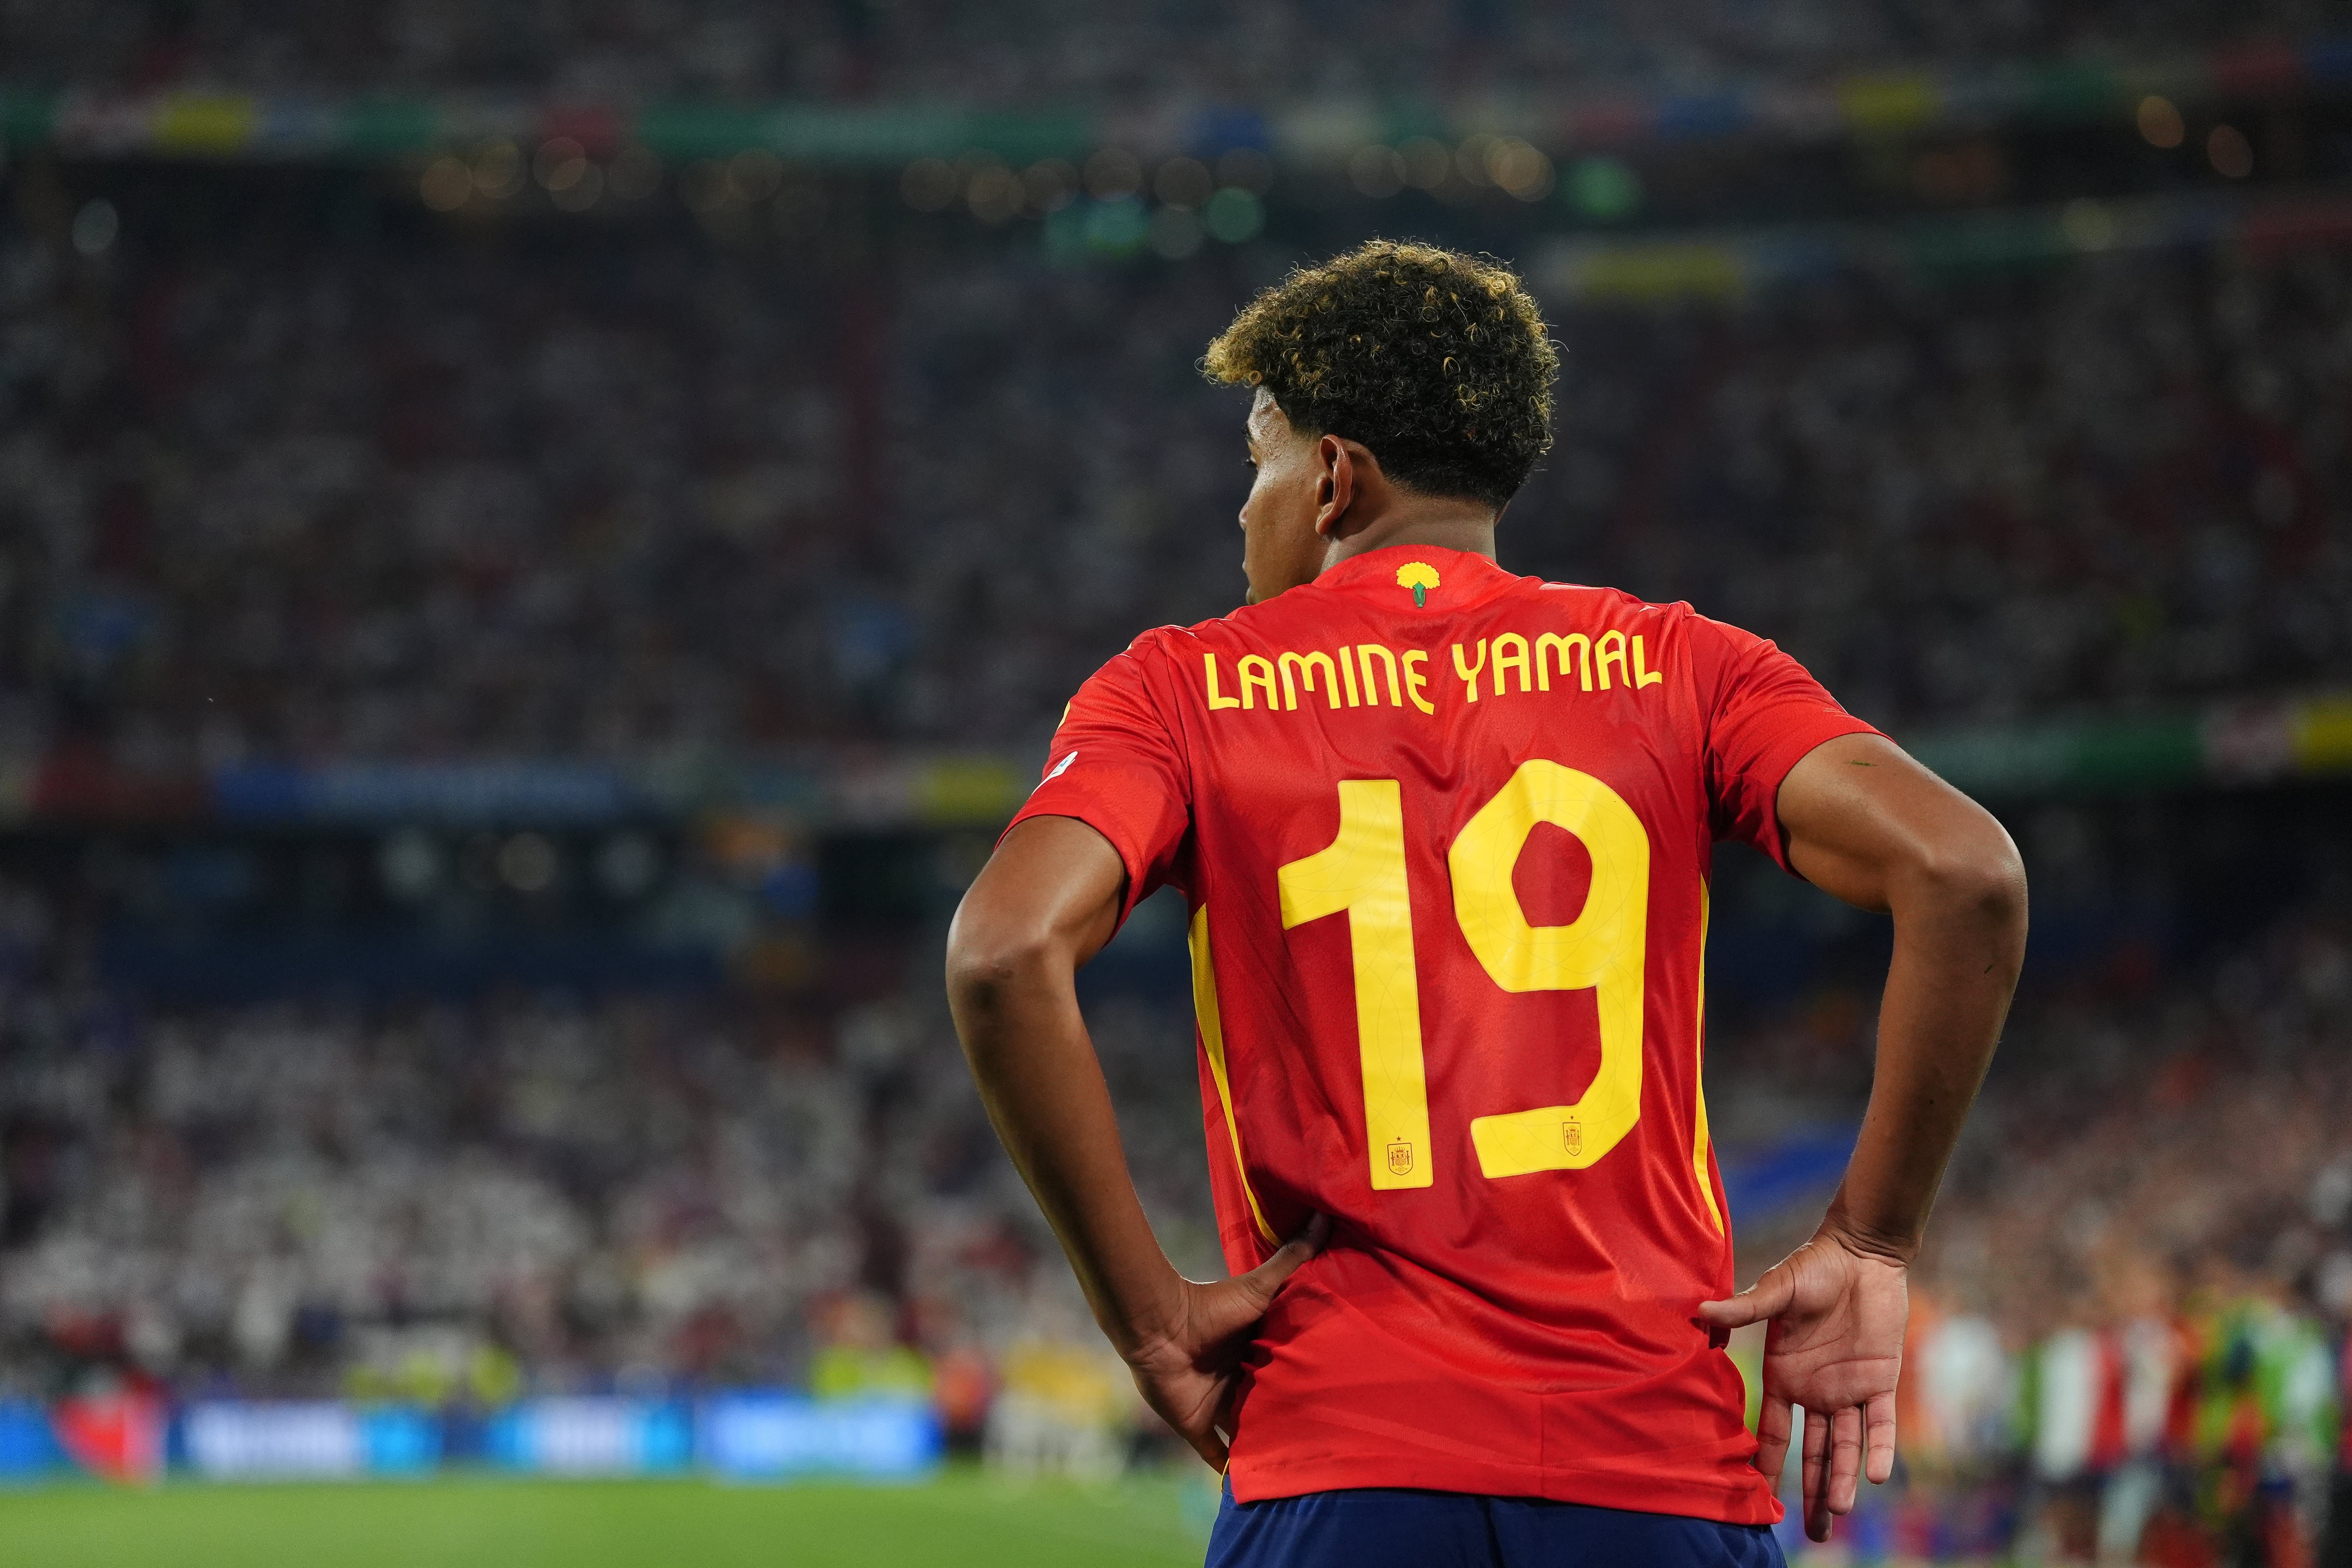 Lamine Yamal has lit up Spain’s run to the final (Bradley Collyer/PA)